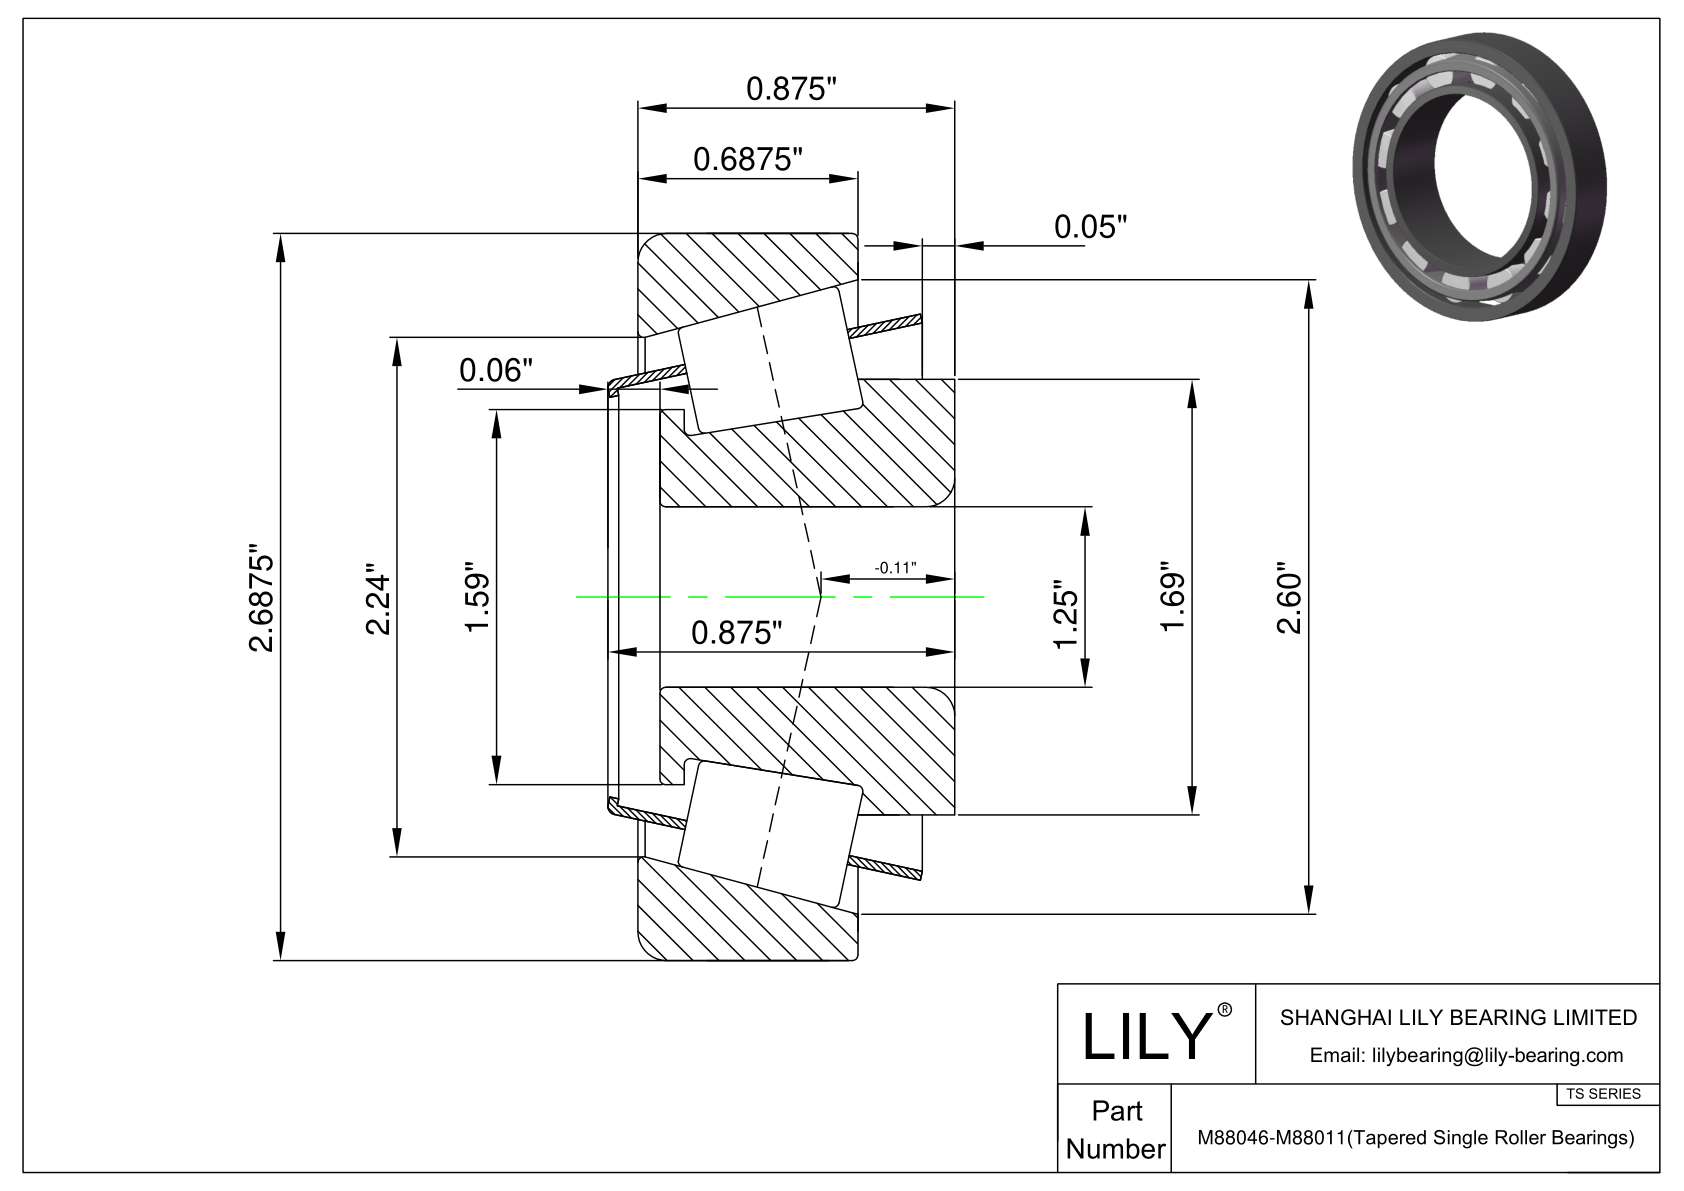 M88046-M88011 TS (Tapered Single Roller Bearings) (Imperial) cad drawing